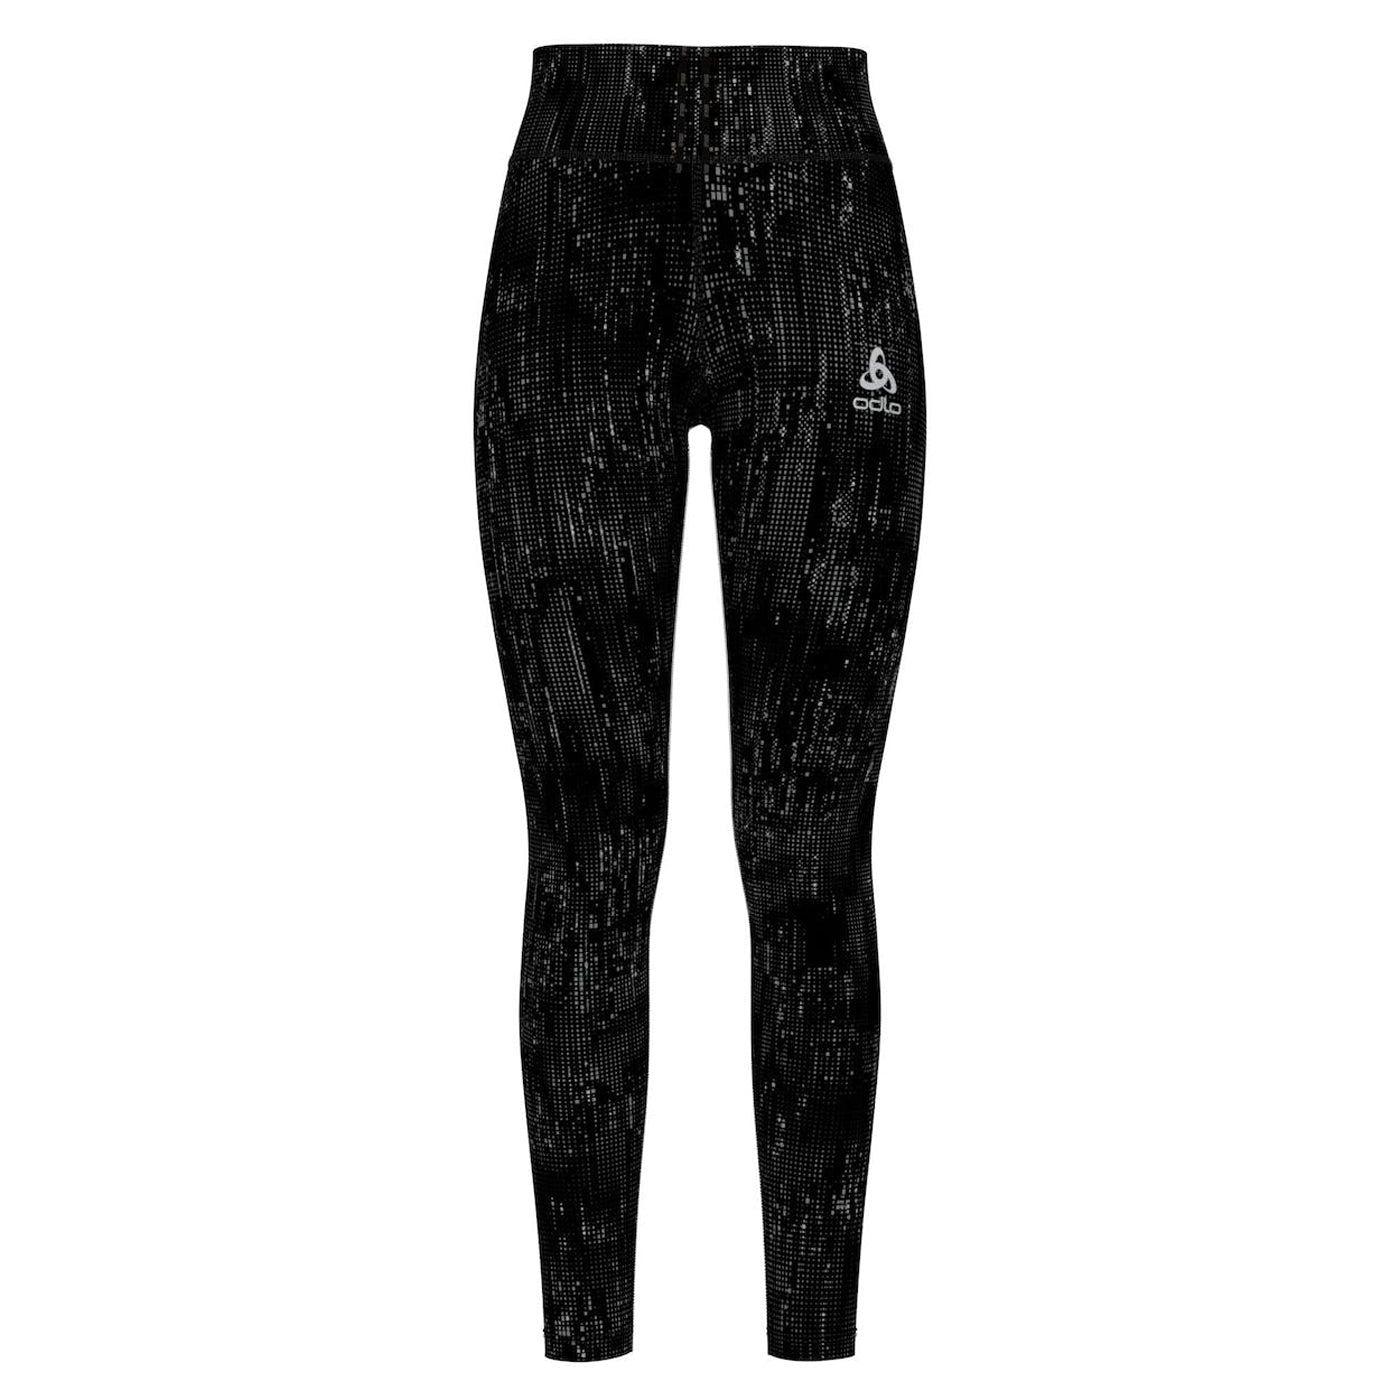 Odlo Tights ZEROWEIGHT PRINT REFLECTIVE Damen im Outlet Sale